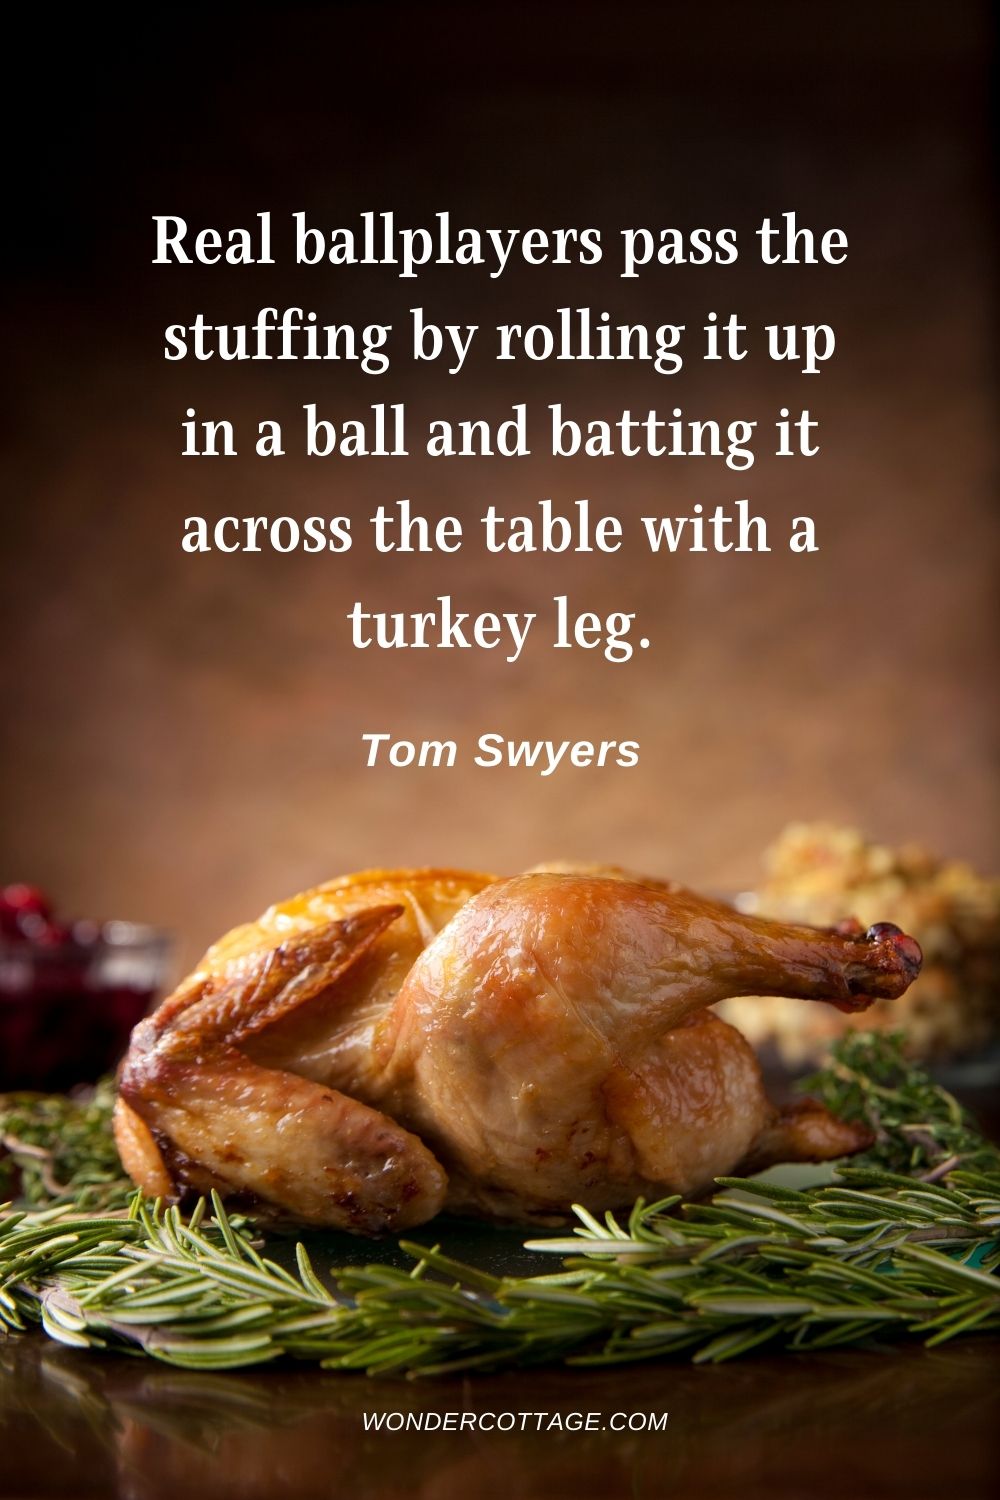 Real ballplayers pass the stuffing by rolling it up in a ball and batting it across the table with a turkey leg. Tom Swyers